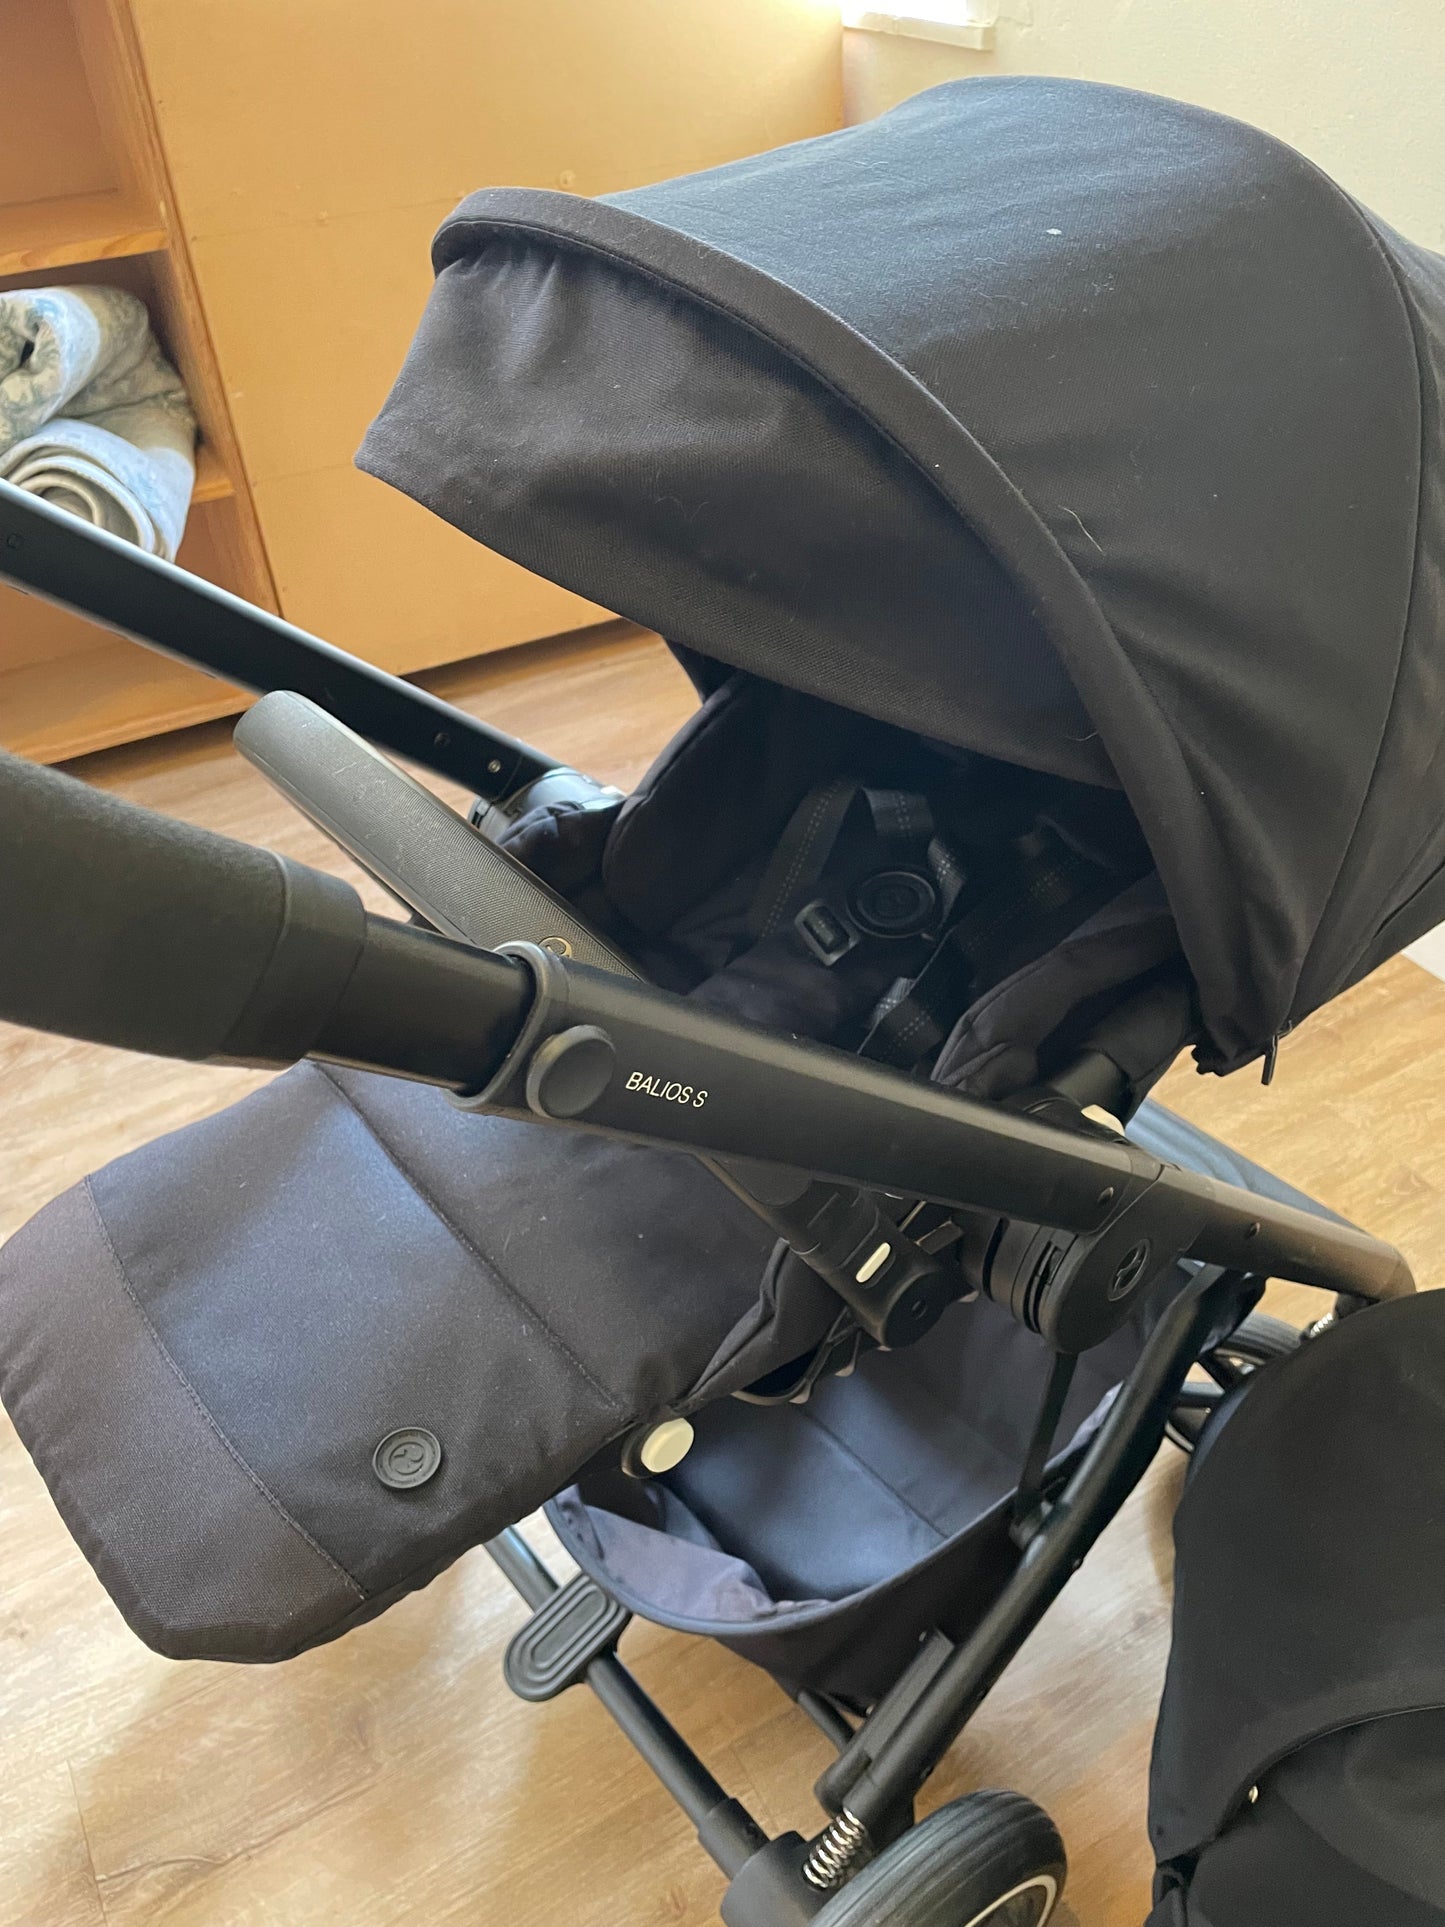 Cybex Balios S Lux with Cot S and infant seat adapters*